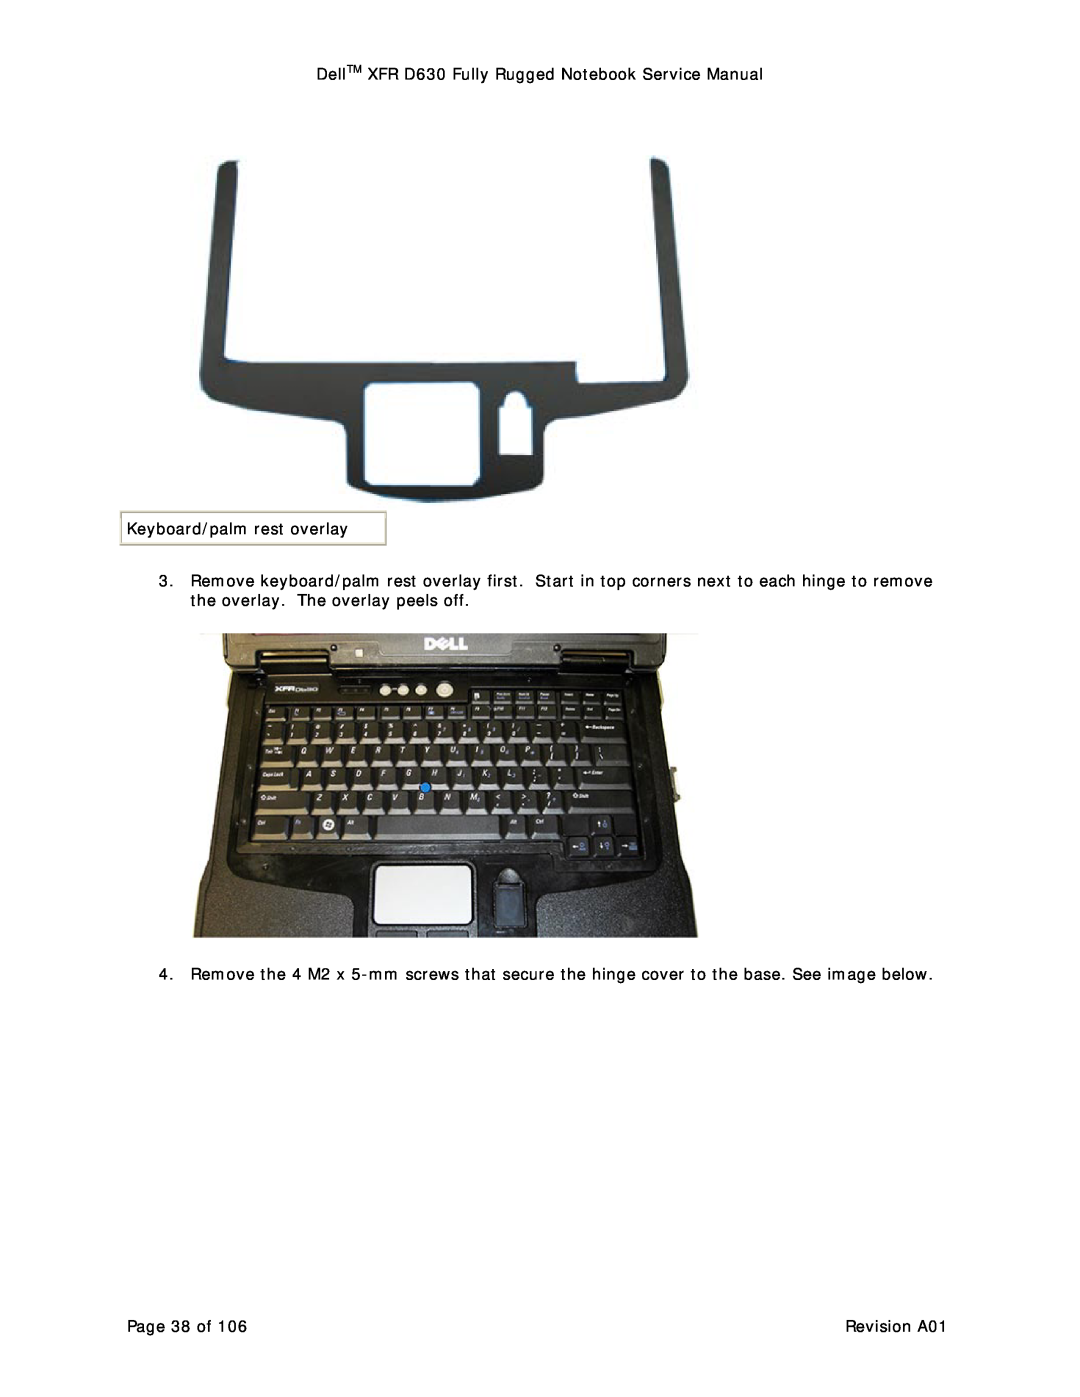 Dell DellTM XFR D630 Fully Rugged Notebook Service Manual, Keyboard/palm rest overlay, Page 38 of, Revision A01 